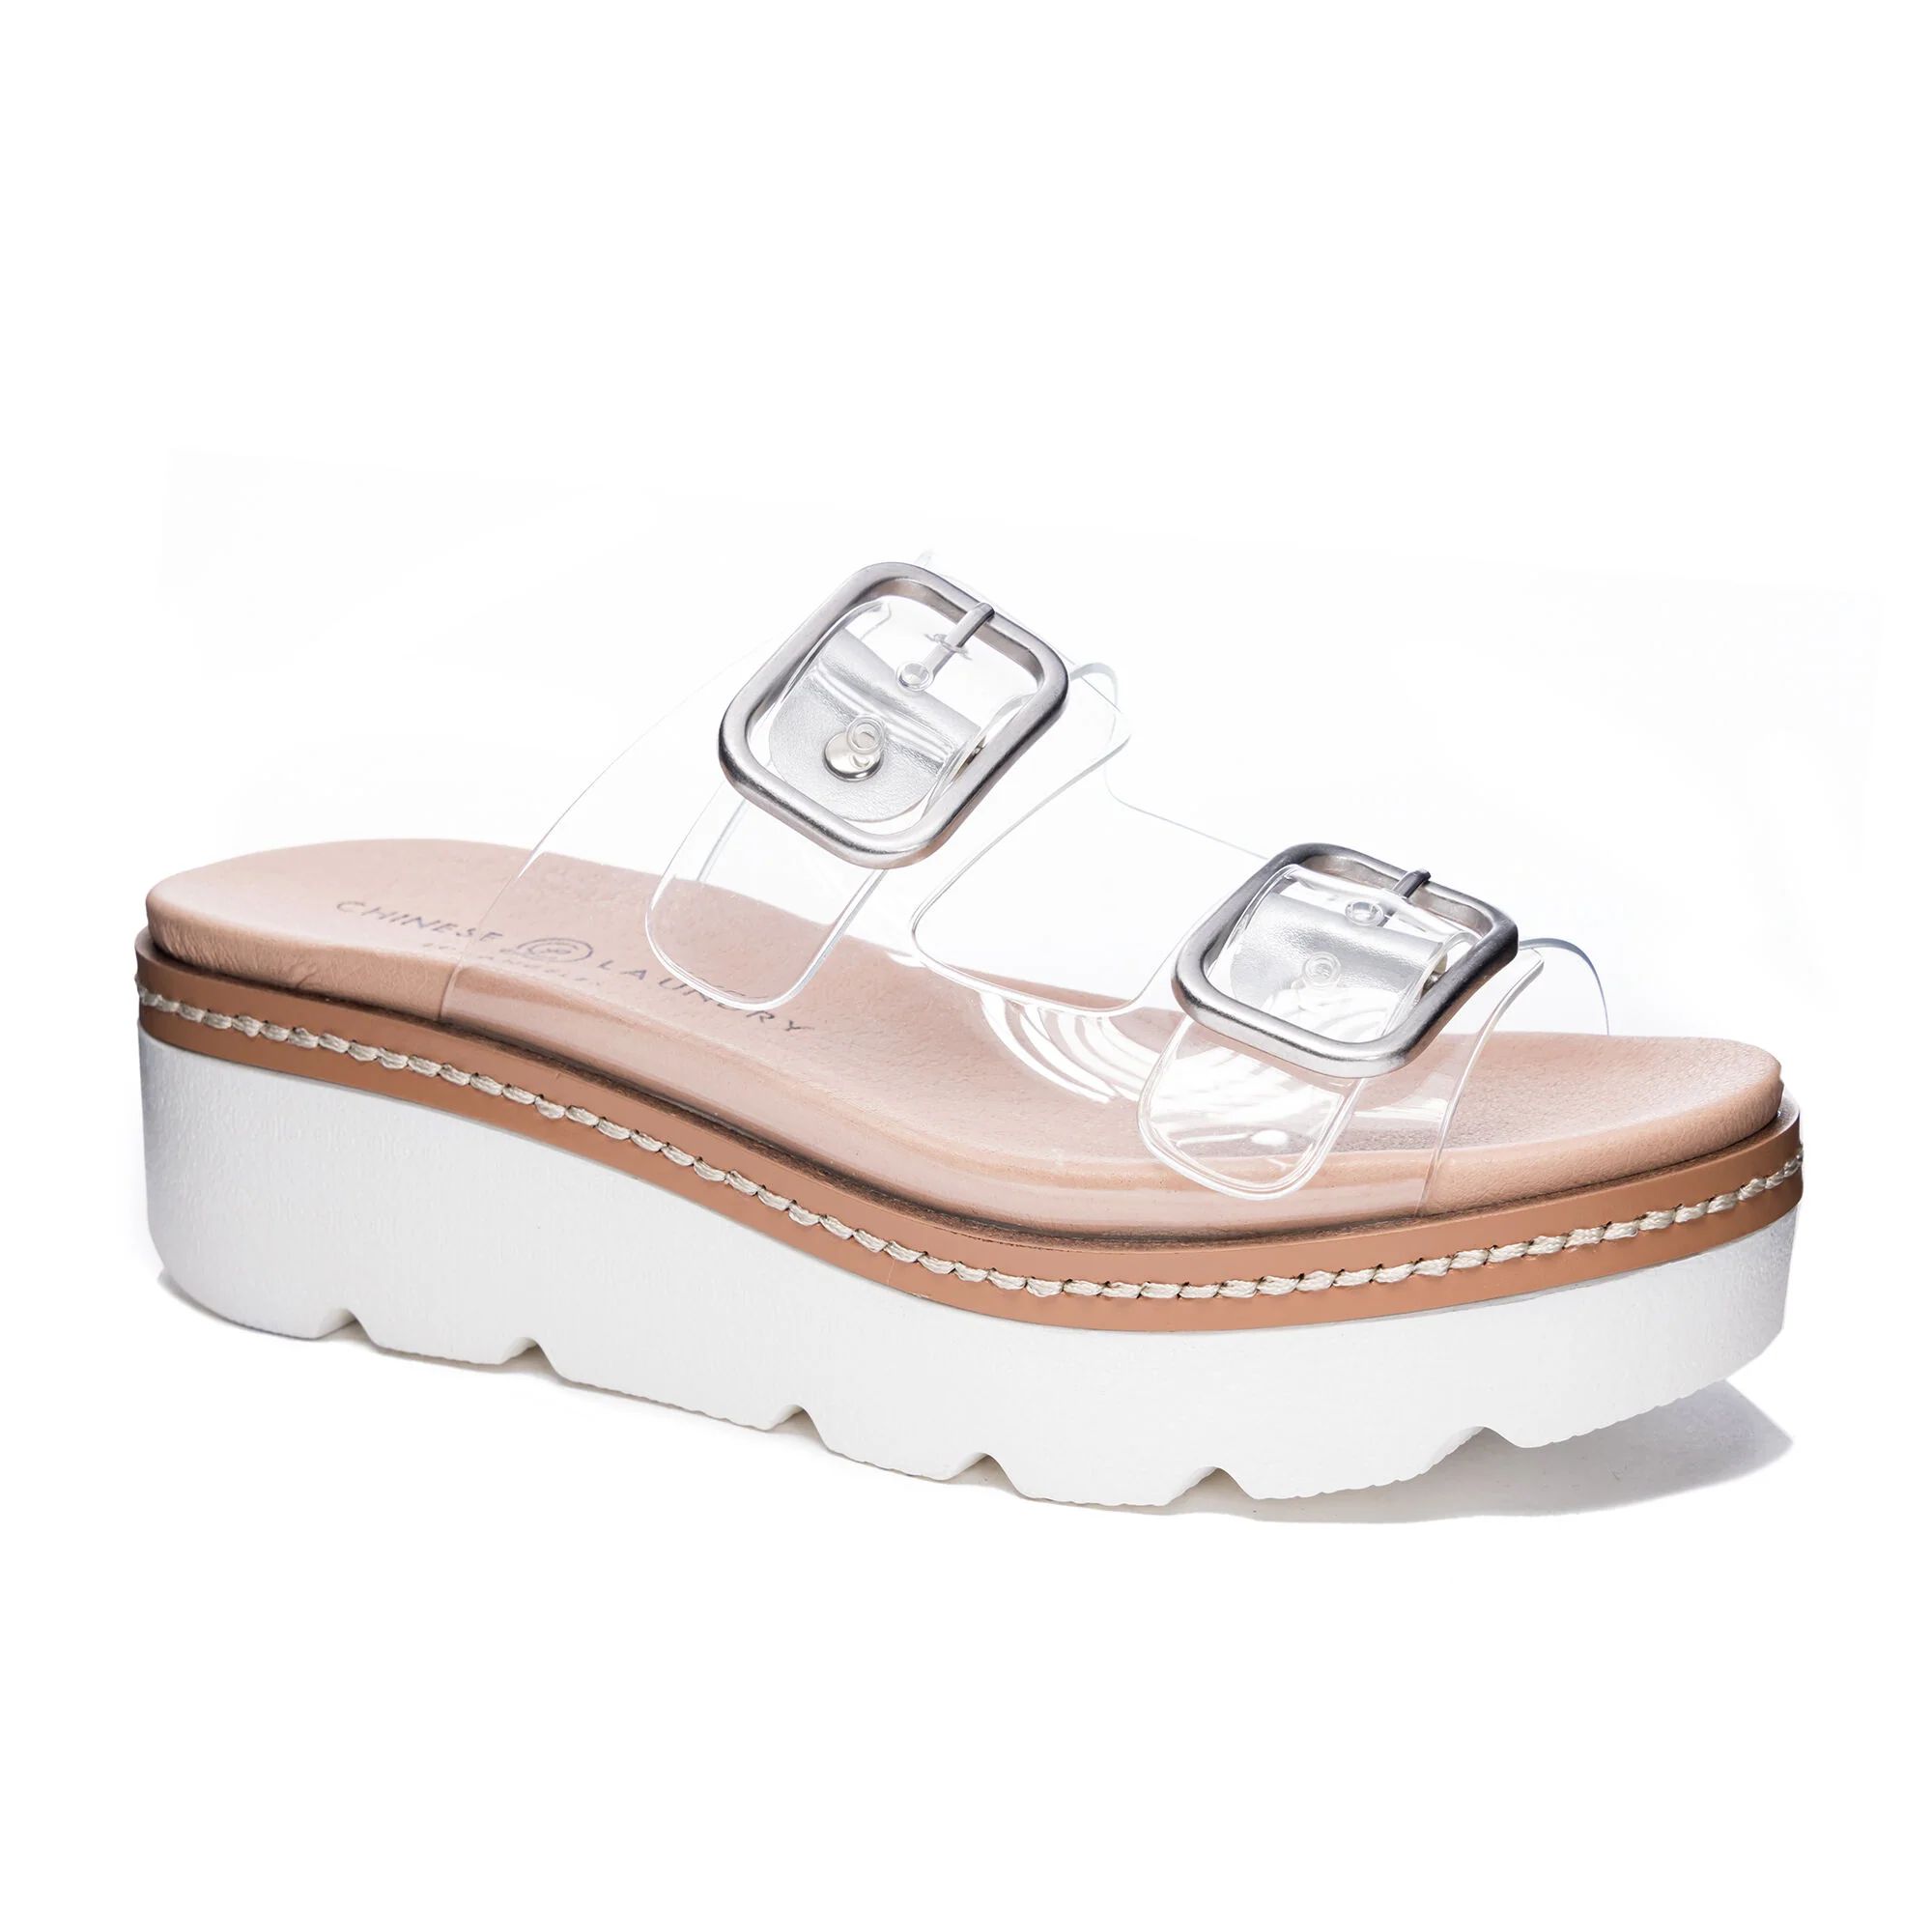 Surfs Up Sandal | Chinese Laundry